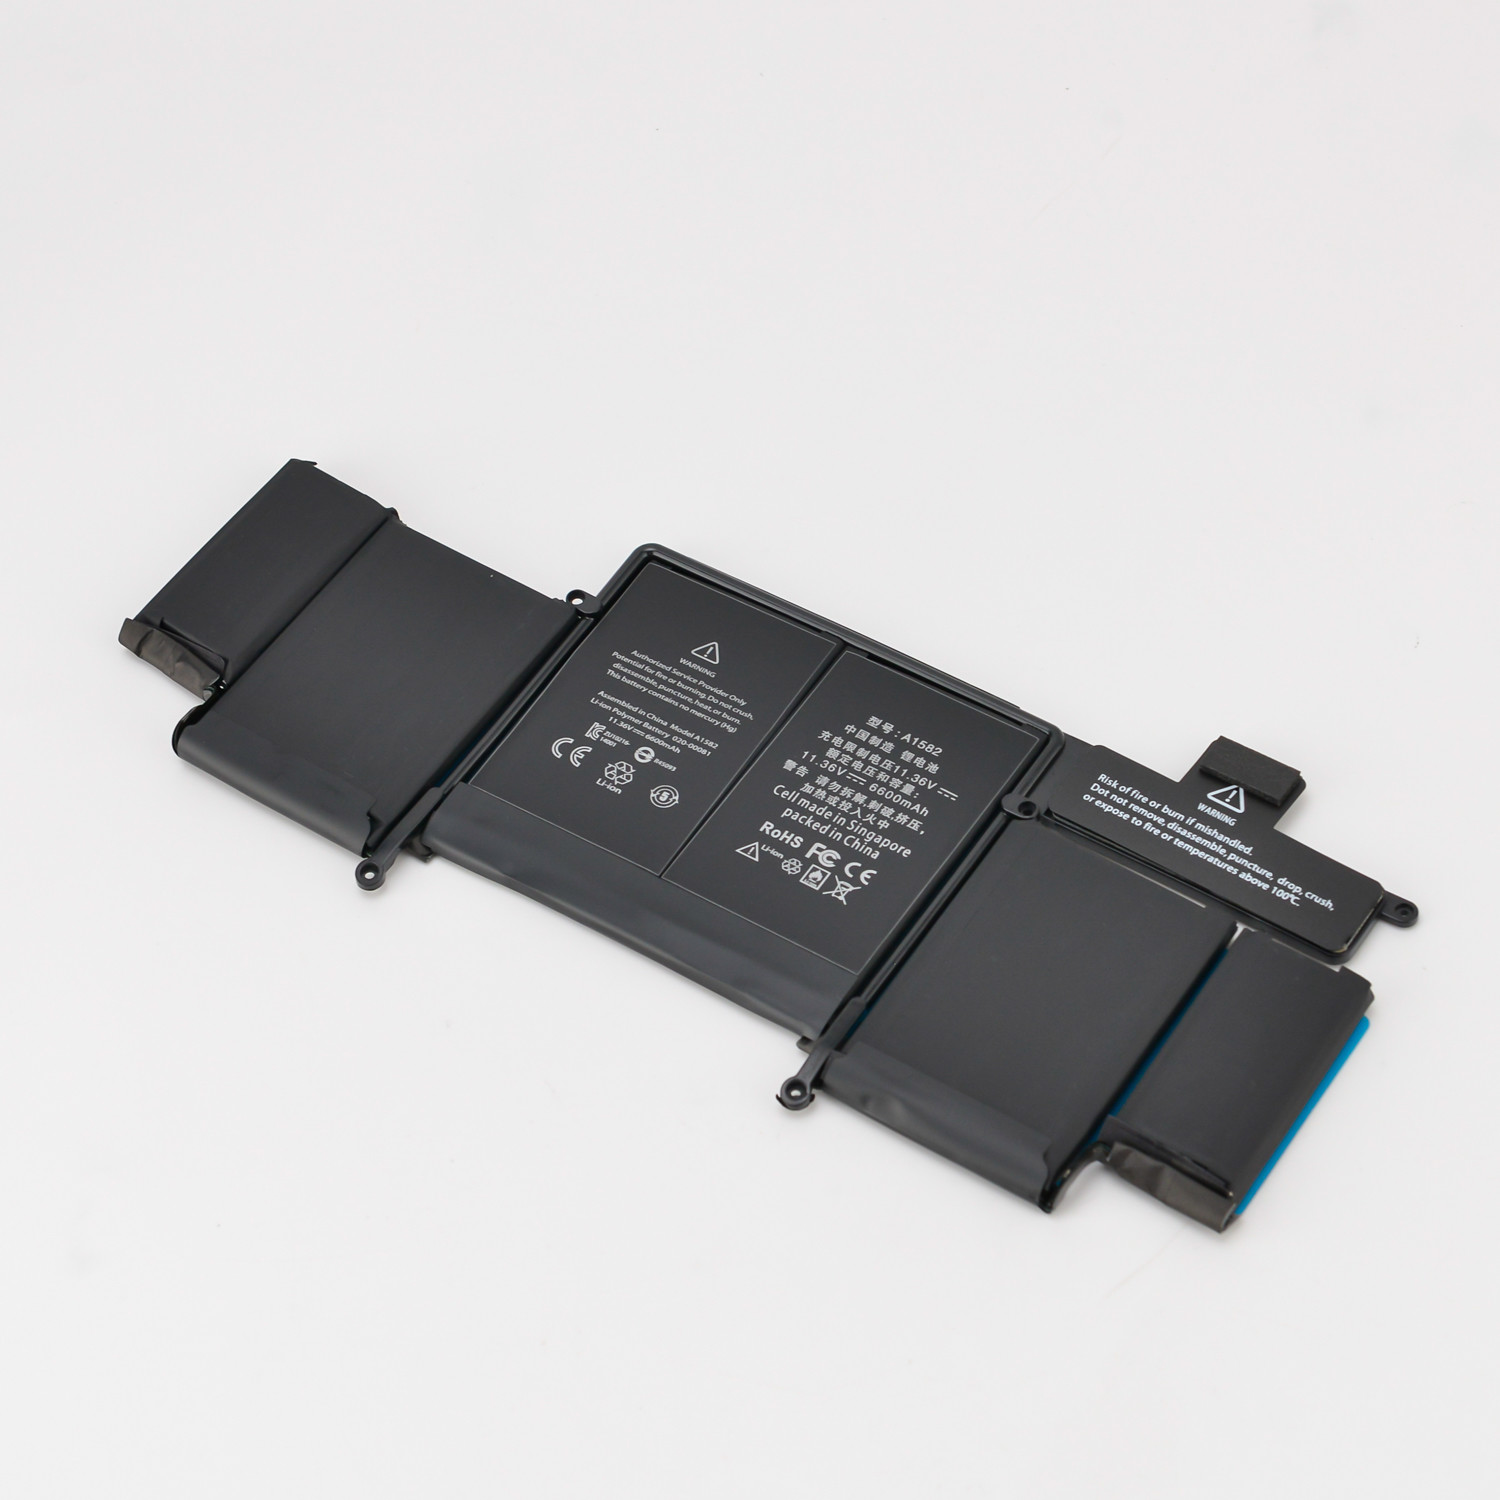 Quality 11.42V 74.9Wh Laptop Battery A1582 for Macbook Retina Pro 13" A1502 Early 2015 Rechargeable Battery for sale